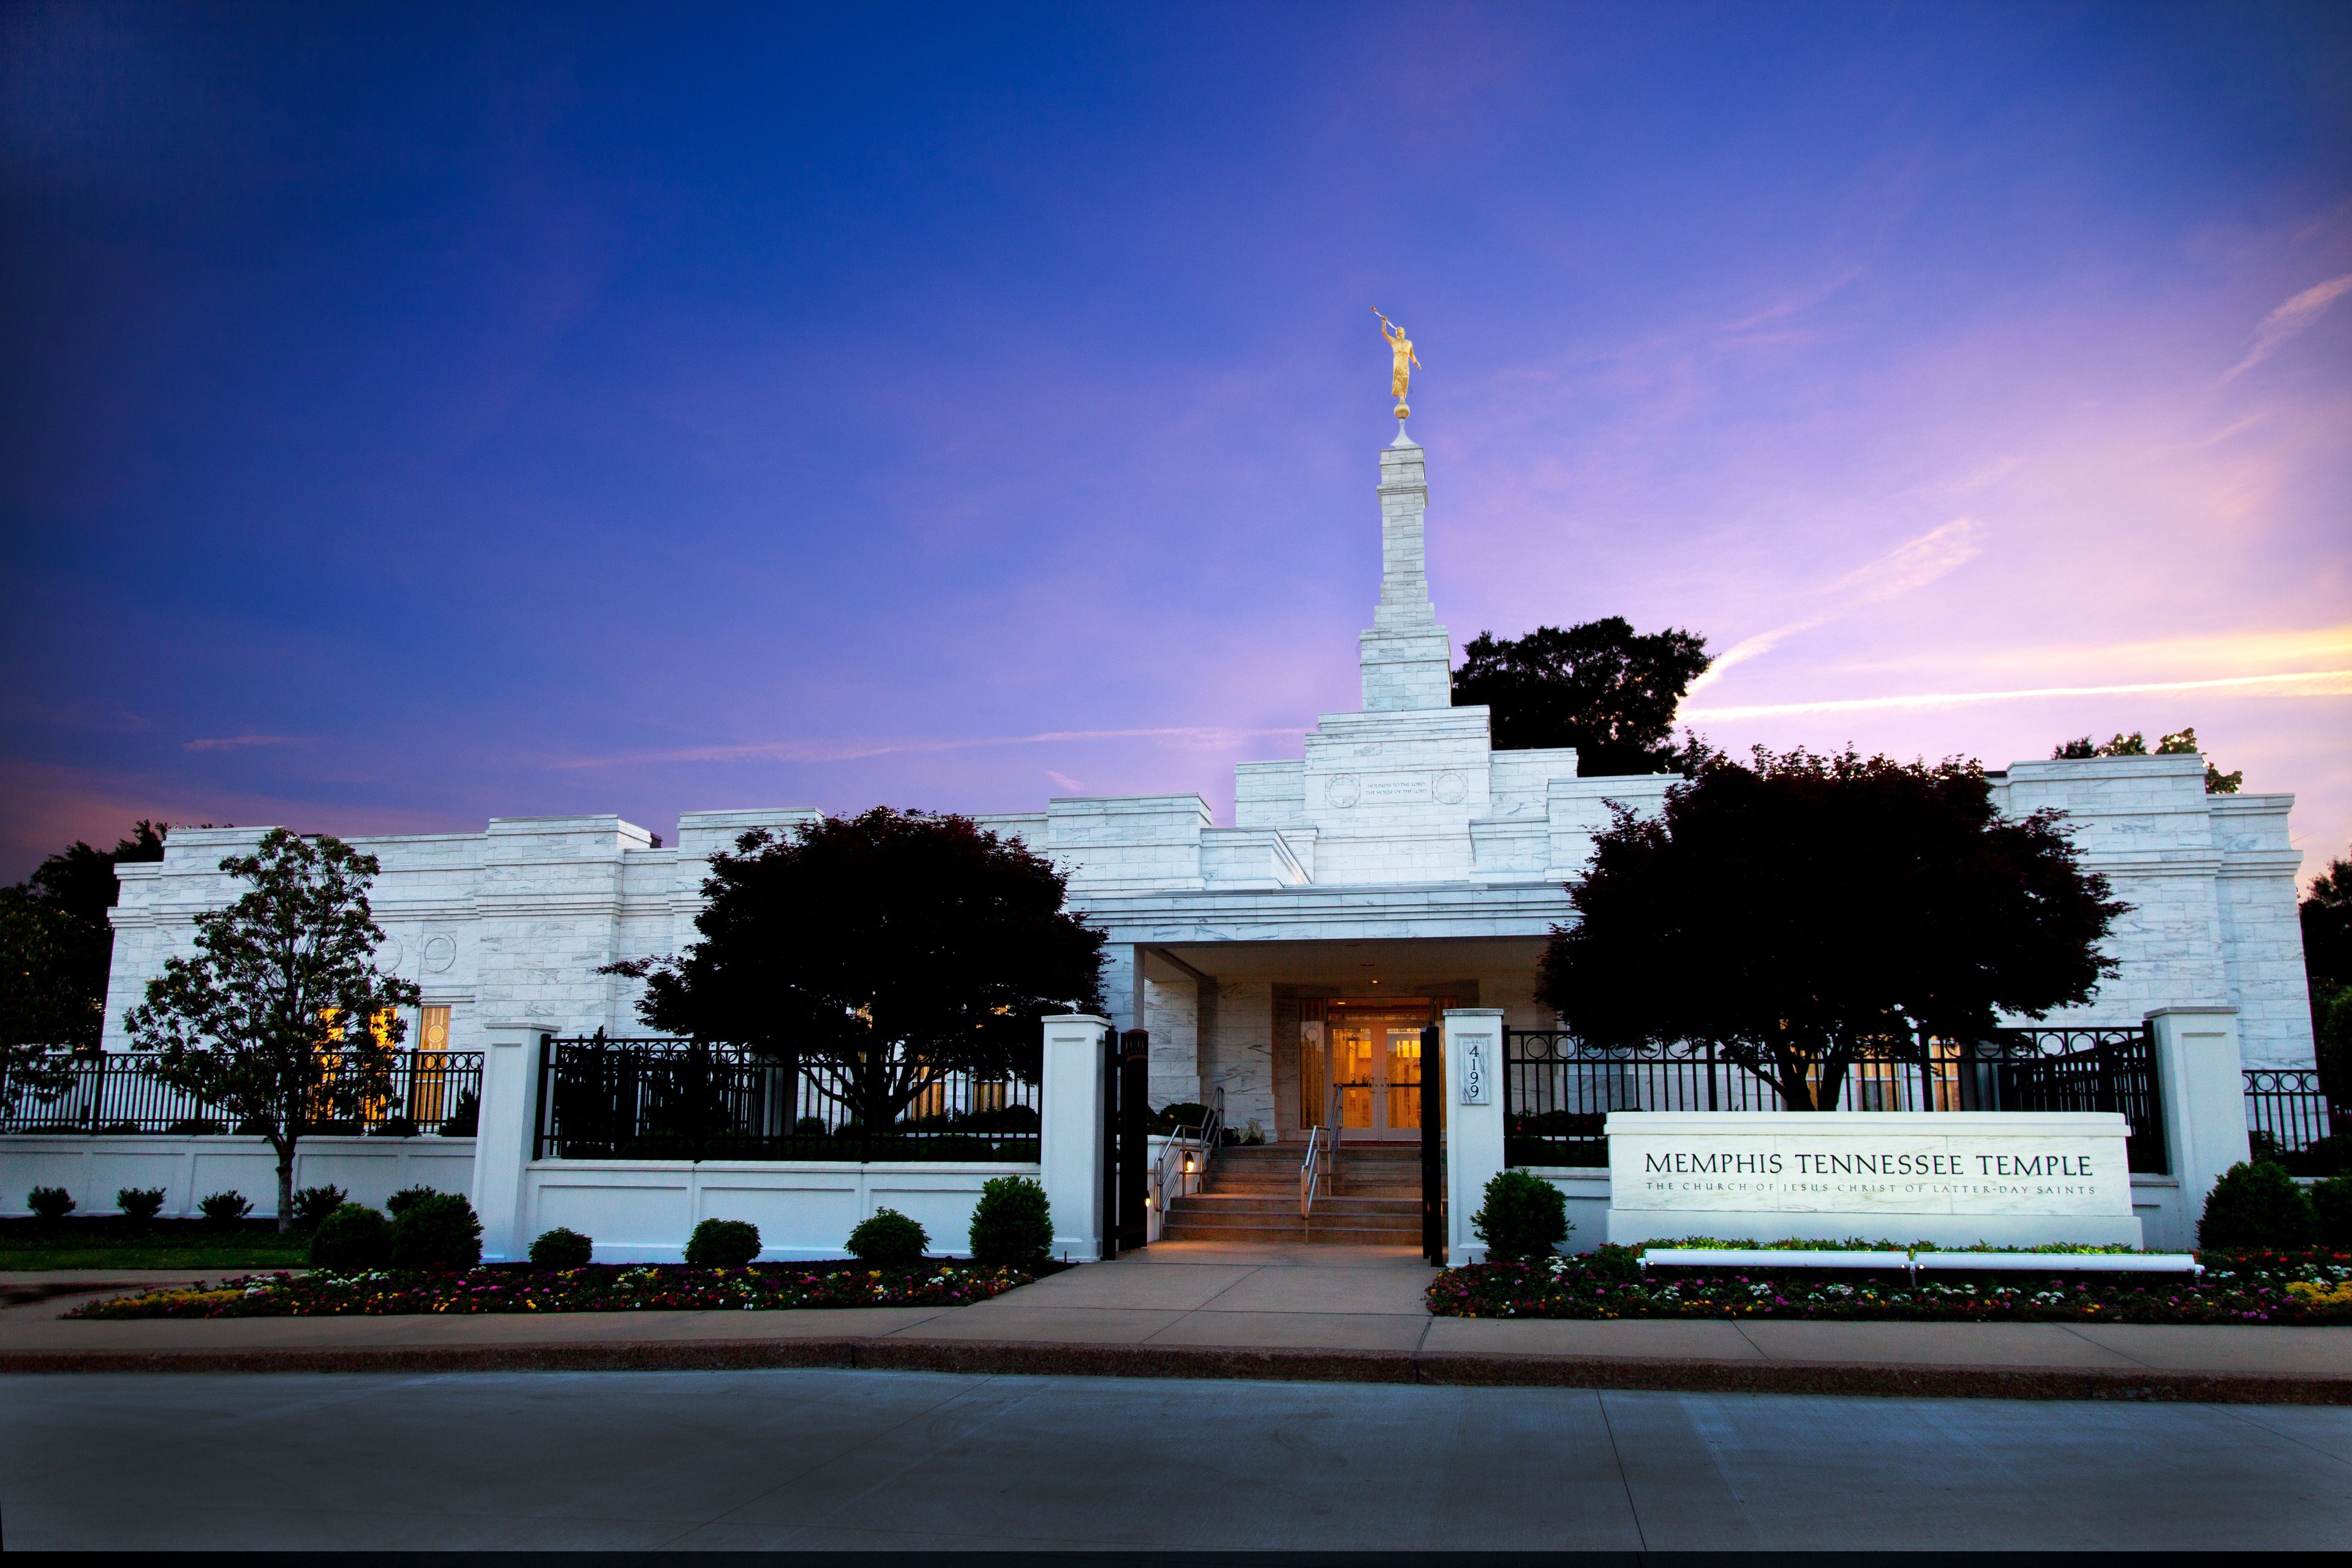 A sunset behind the Memphis Tennessee Temple.